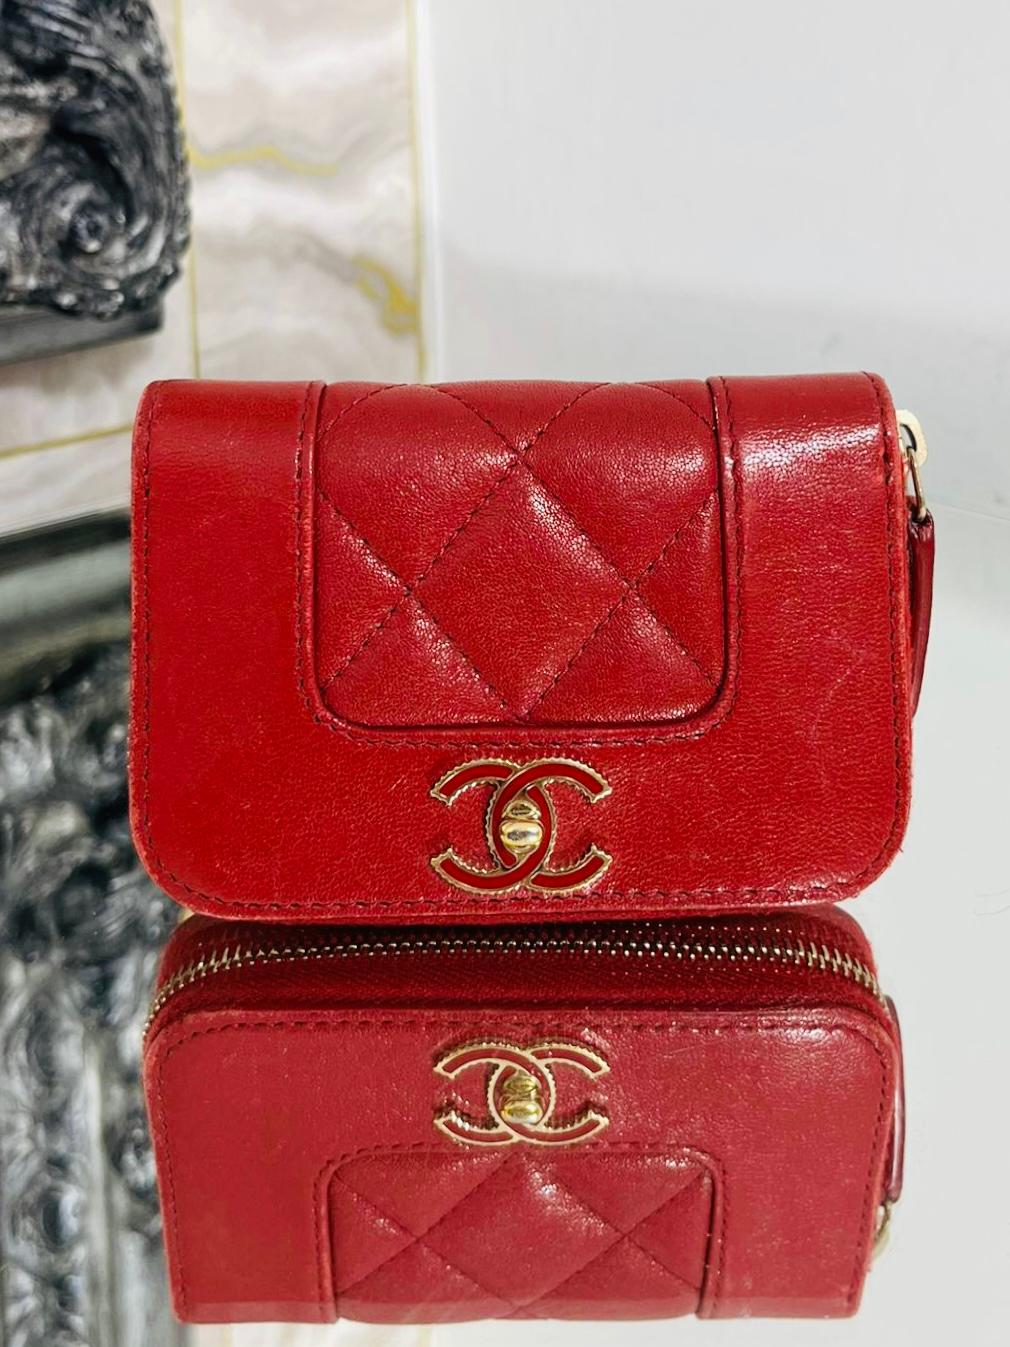 Chanel Leather Mini Purse/Wallet

Red Lambskin leather with quilted, diamond stitch detailing and an enamel 

'CC' logo in red and gold. Gold zipper closure with leather pull tab.

Size - Height 8.5cm, Width 12cm, Depth 3cm

Condition - Good (Some